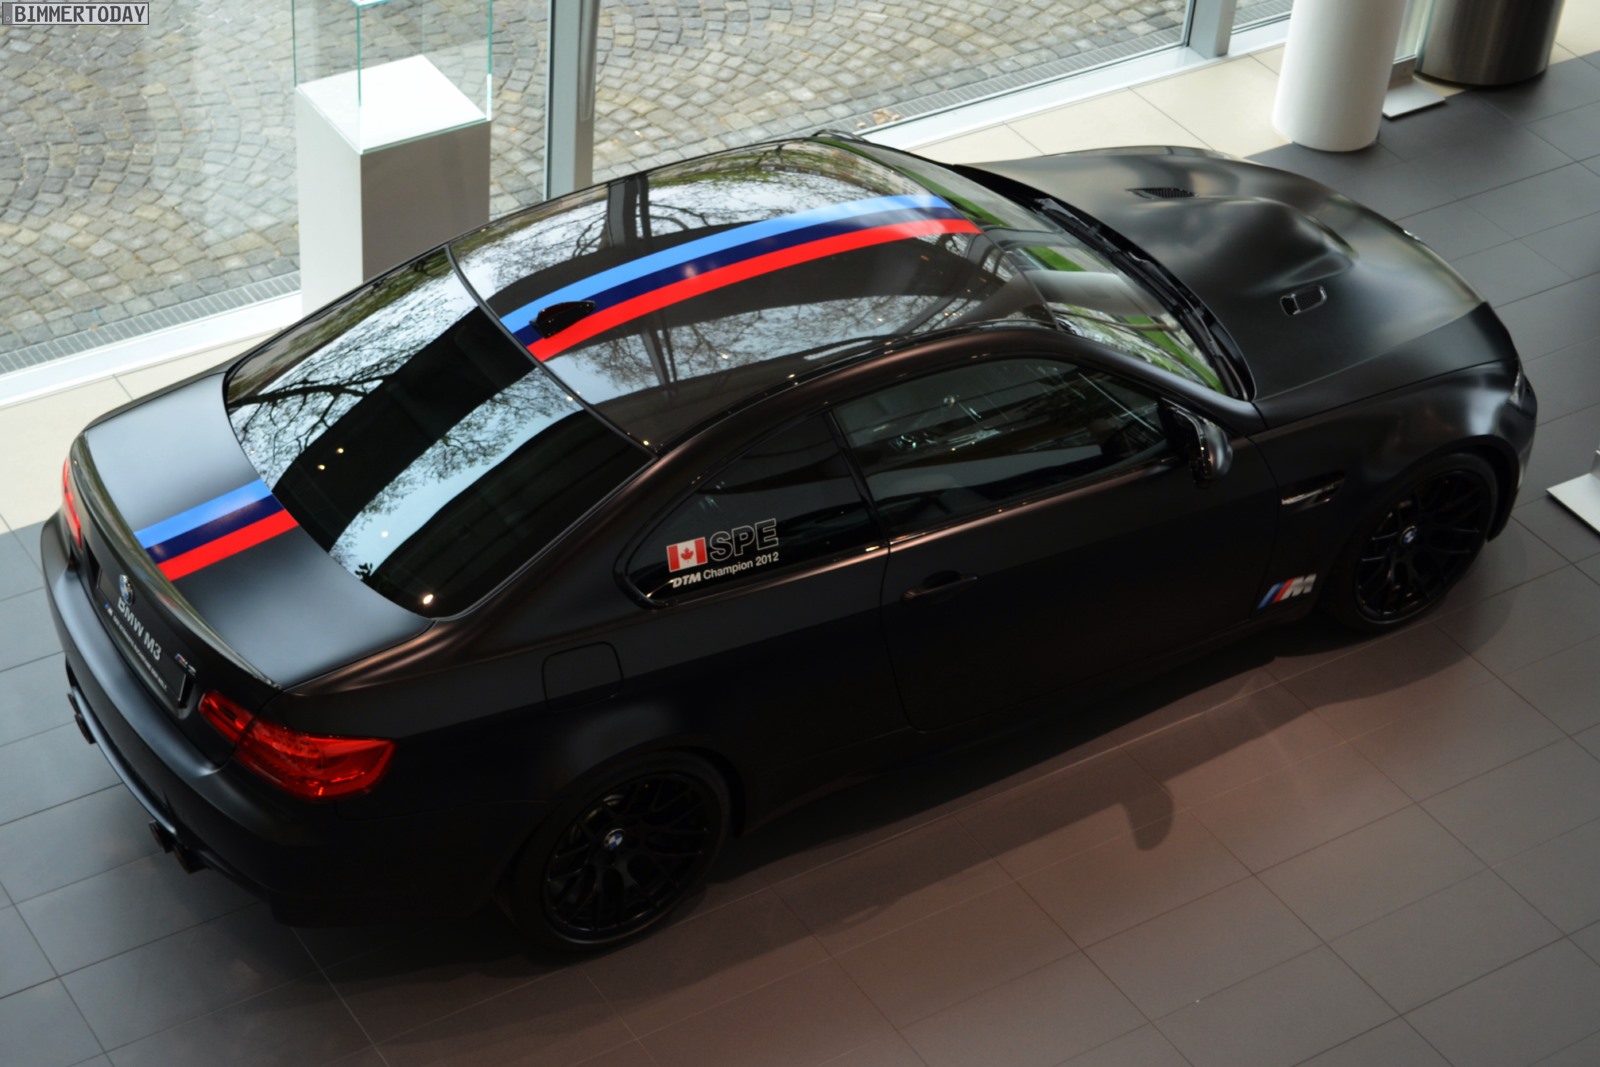 Bmw m3 special edition price #3